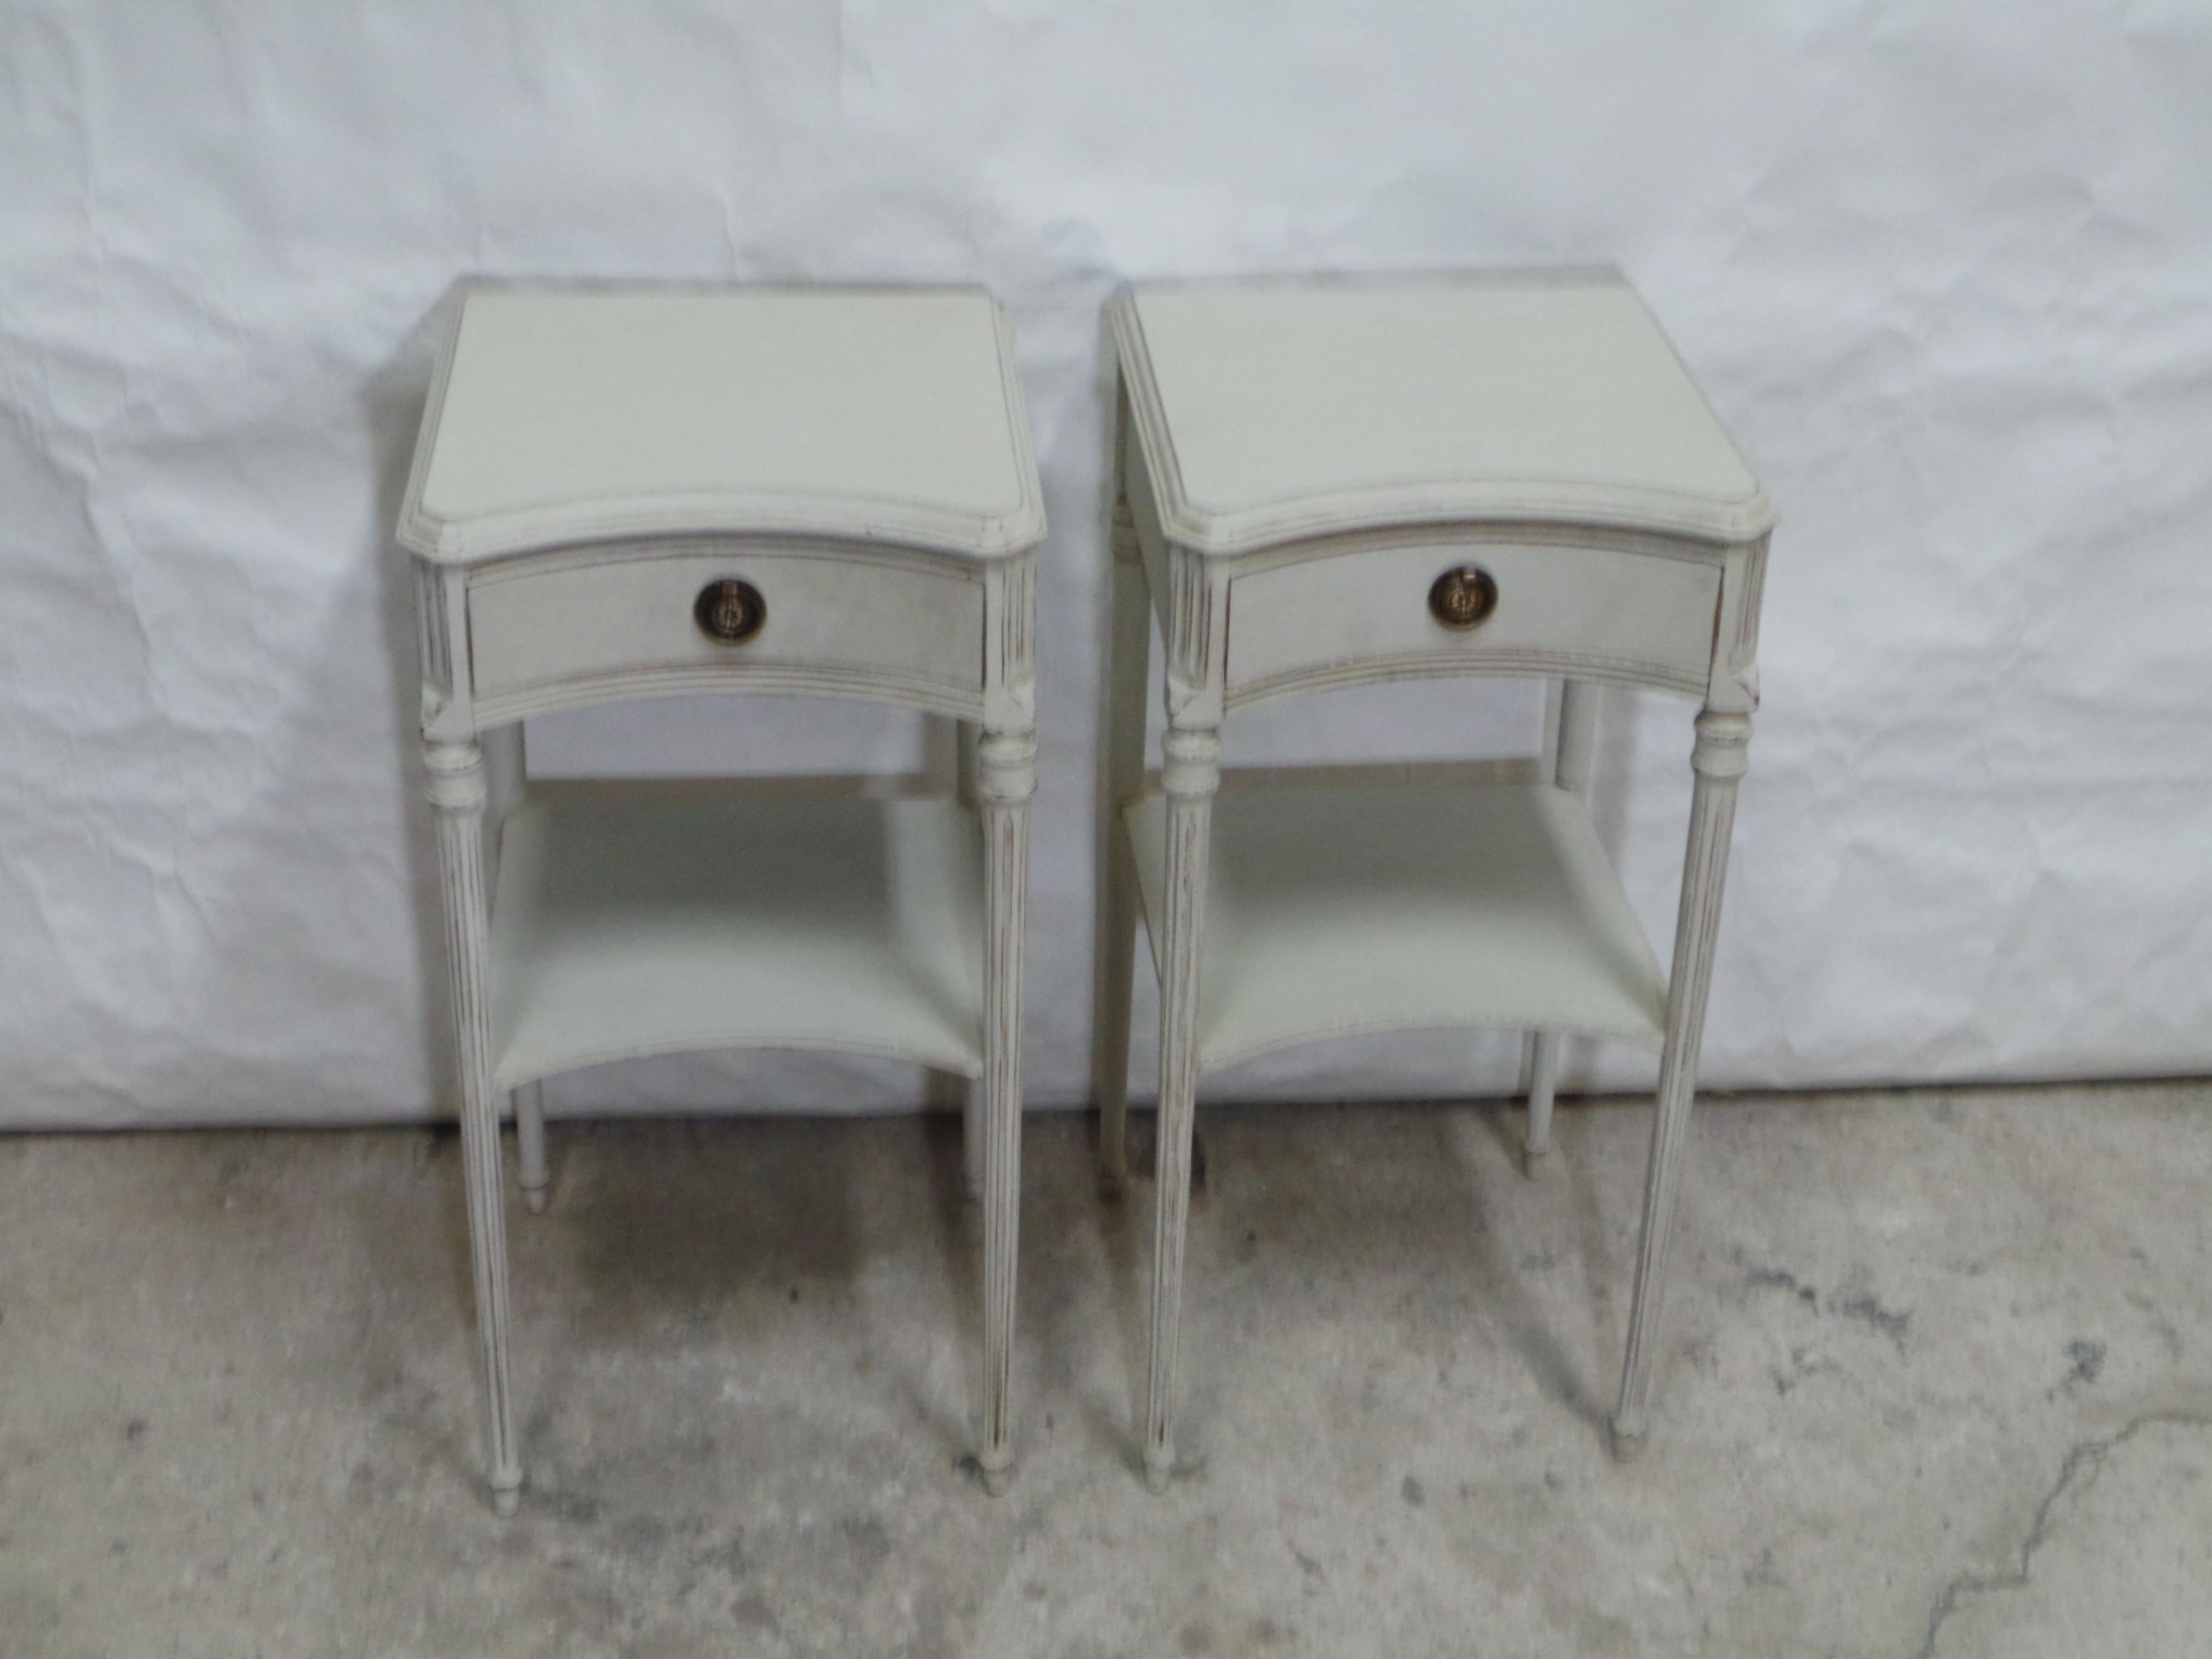 This is a set of 2 Gustavian Style Long leg Nightstands. They have been restored and repainted with Milk Paints 